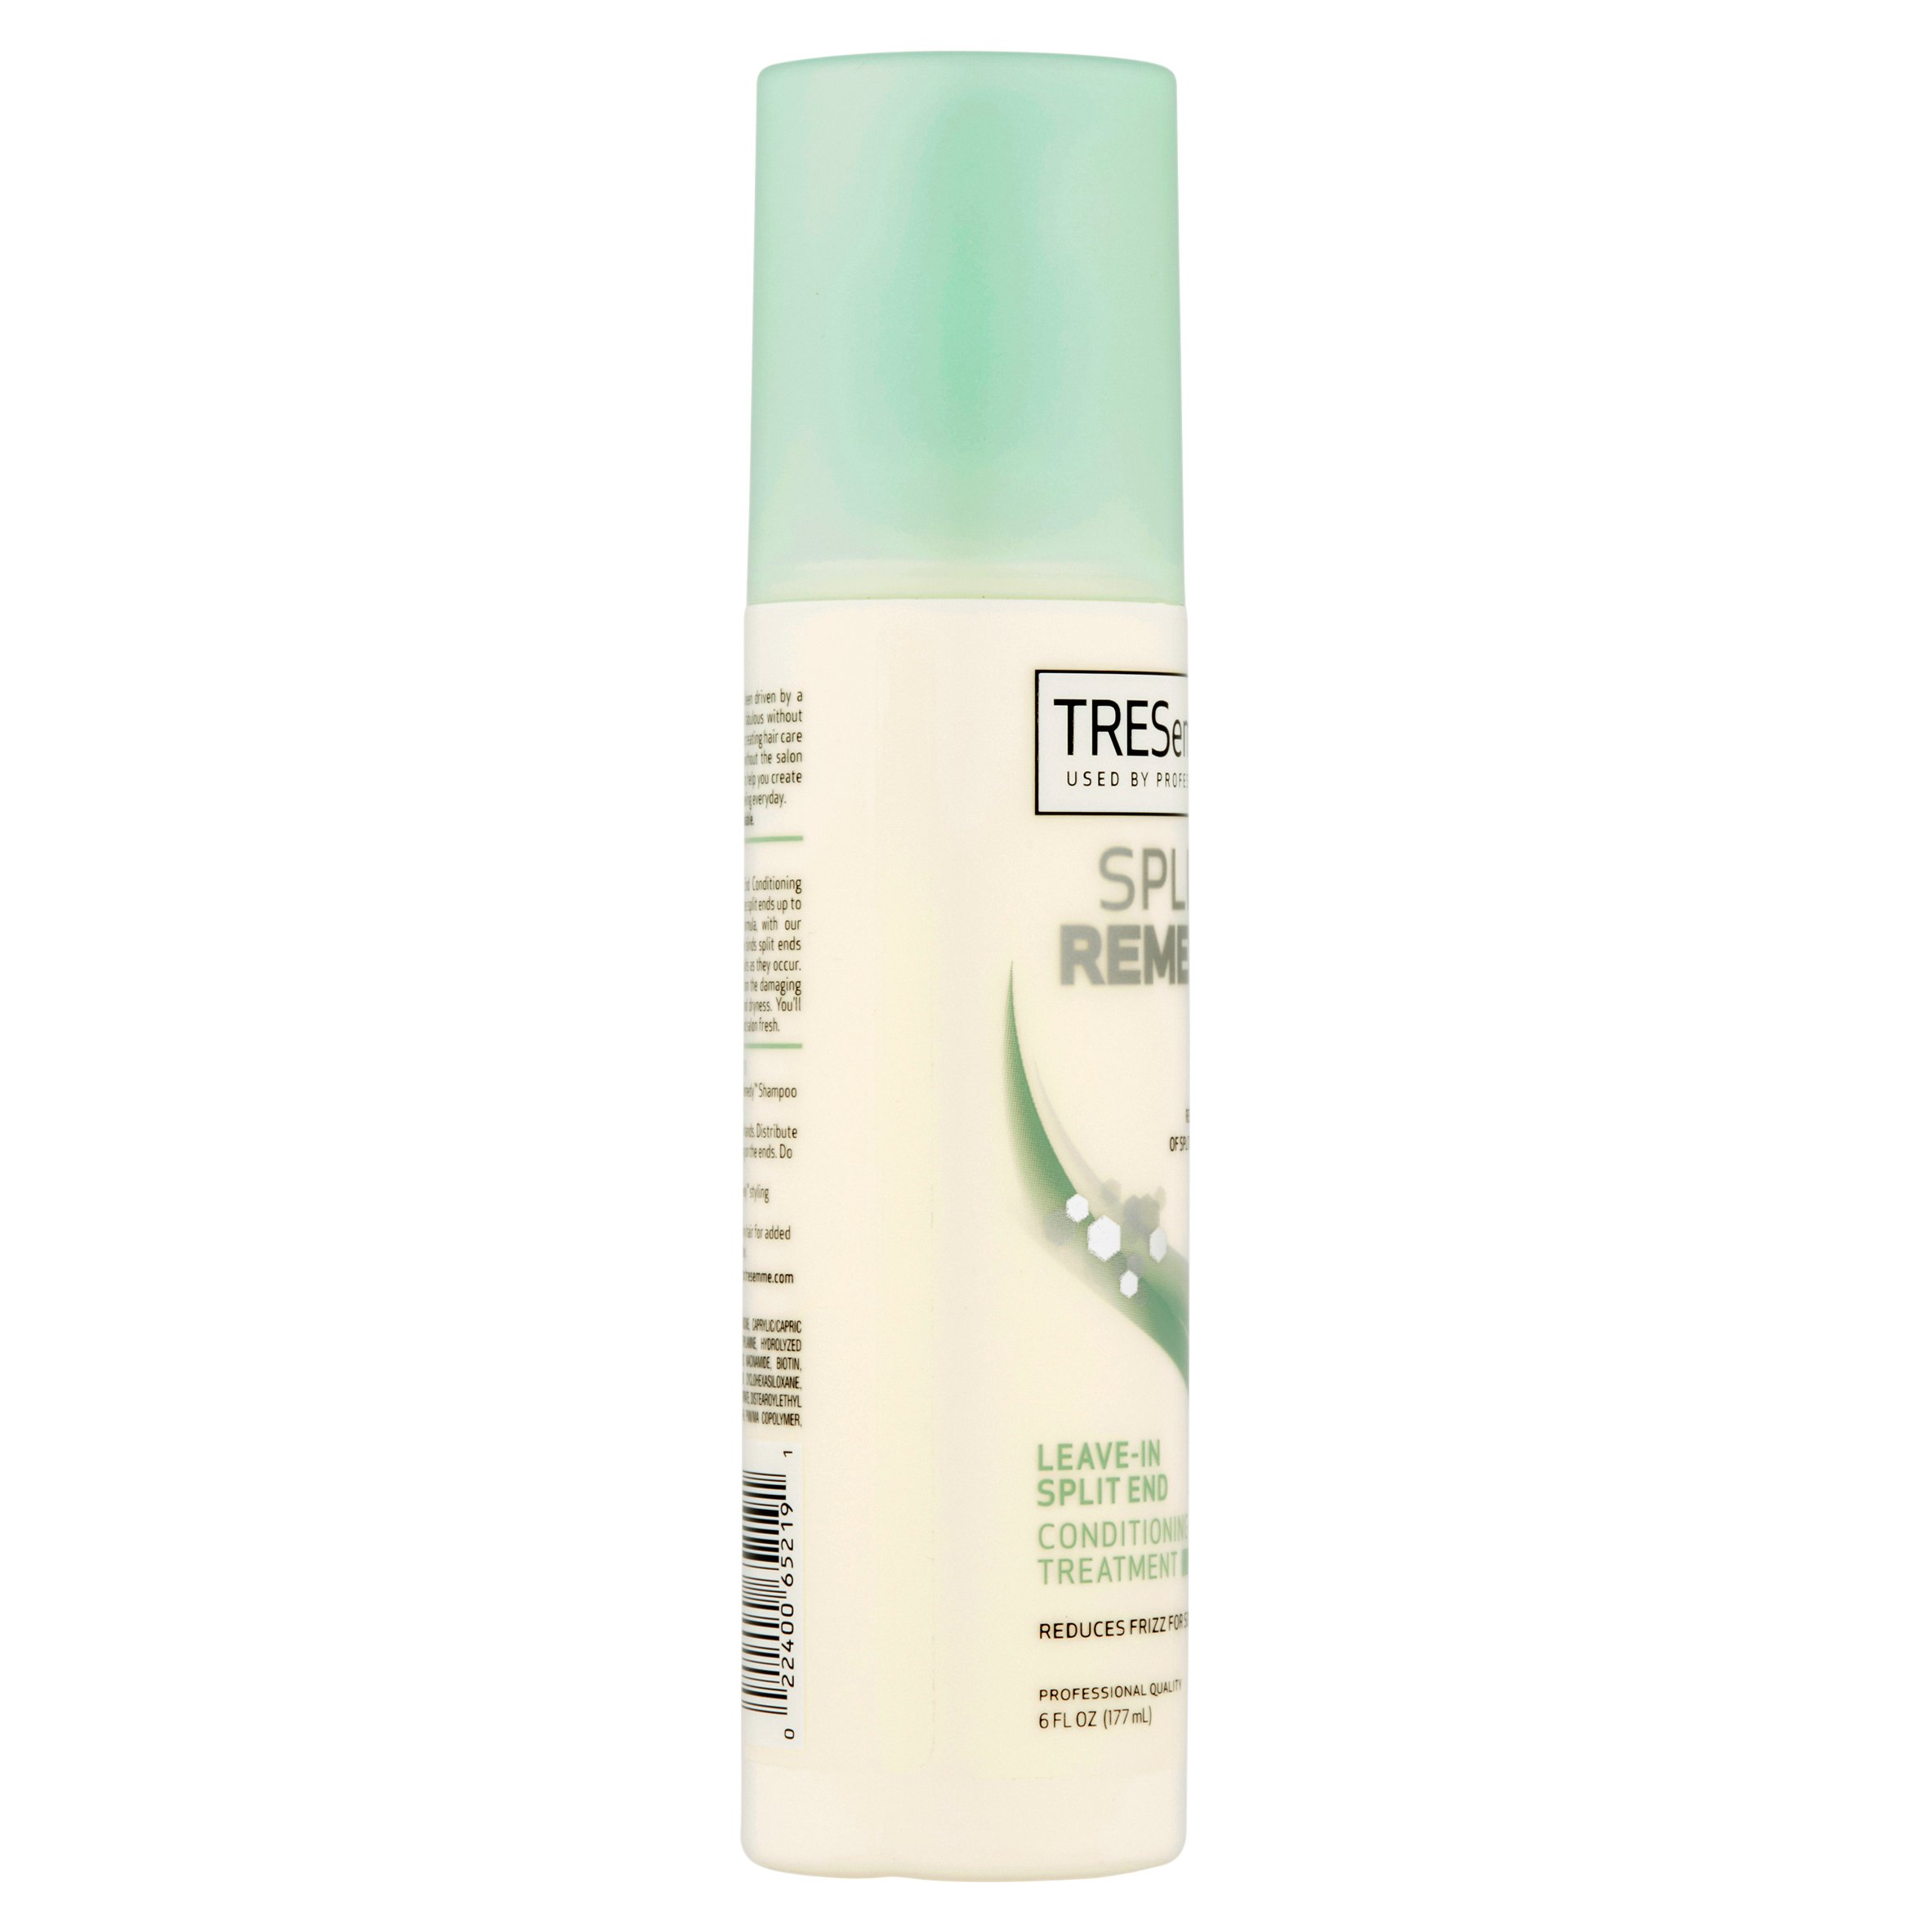 Tresemme Leave-in Conditioner Treatment Split Remedy 6 Oz - image 4 of 6